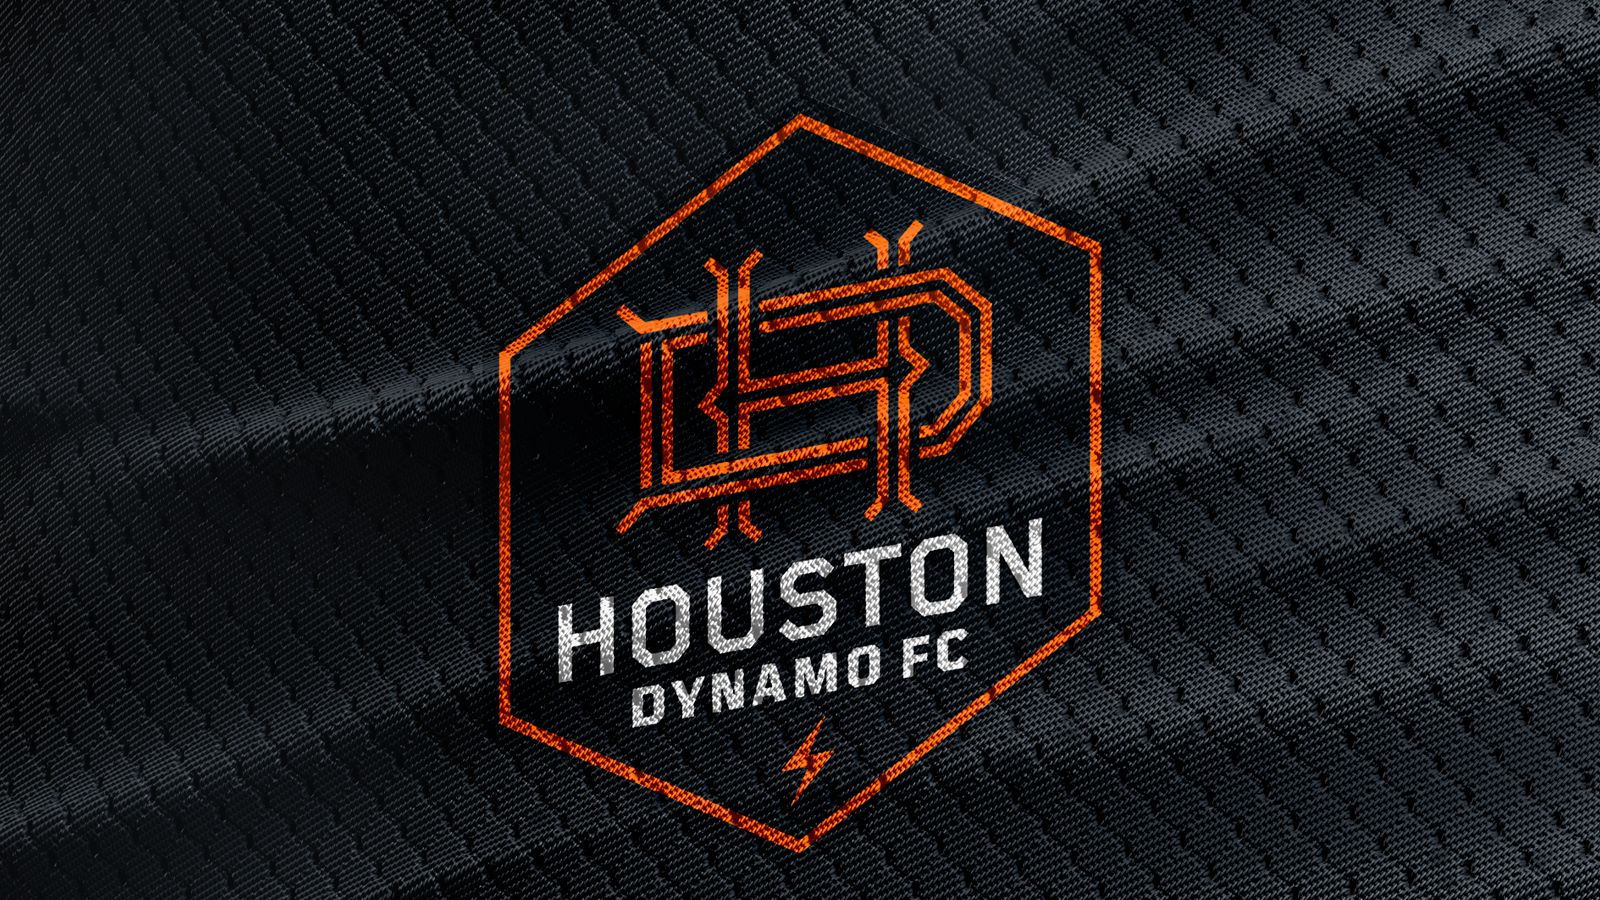 How to watch; Dynamo and Dash expanding their TV presence - Dynamo Theory